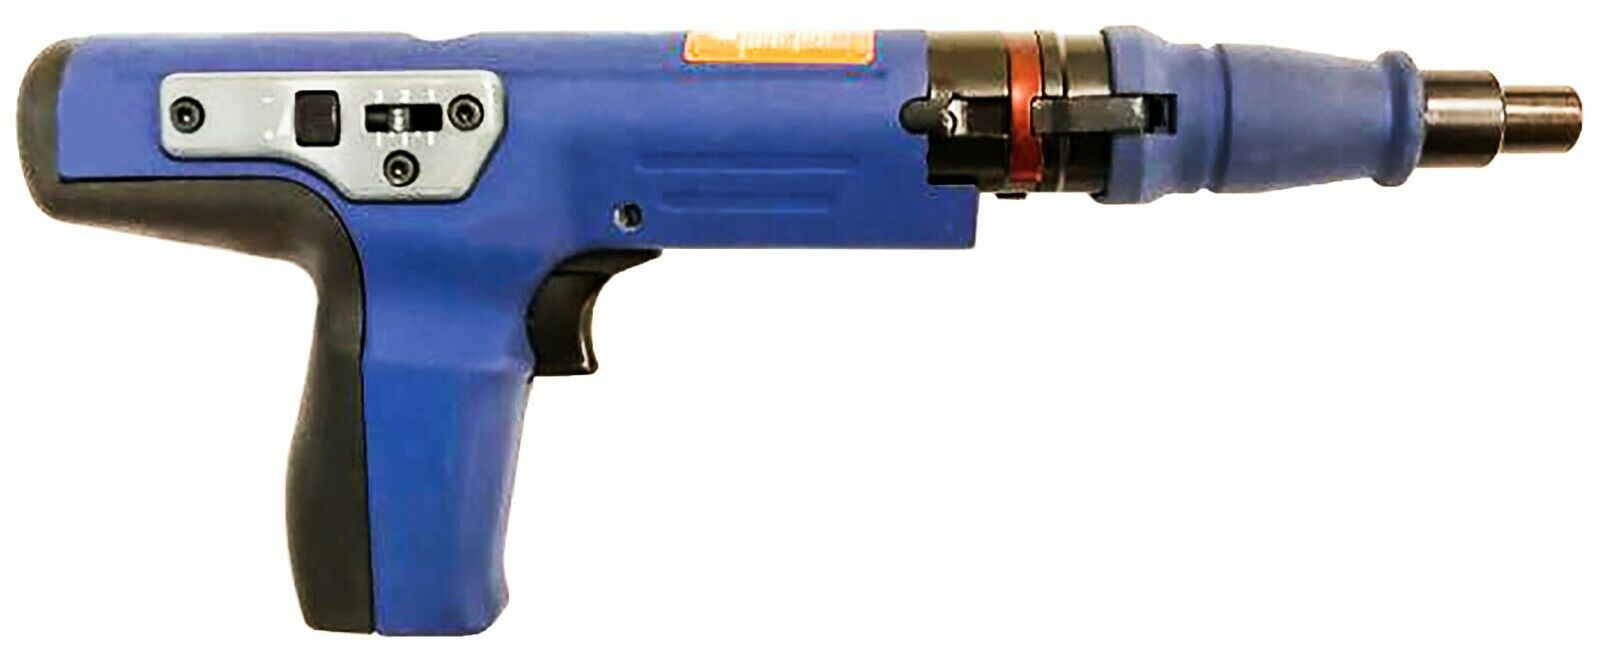 Bluepoint .27 Cal Semi-automatic Powder Actuated Tool, Strip Load, Item# Bp-303a